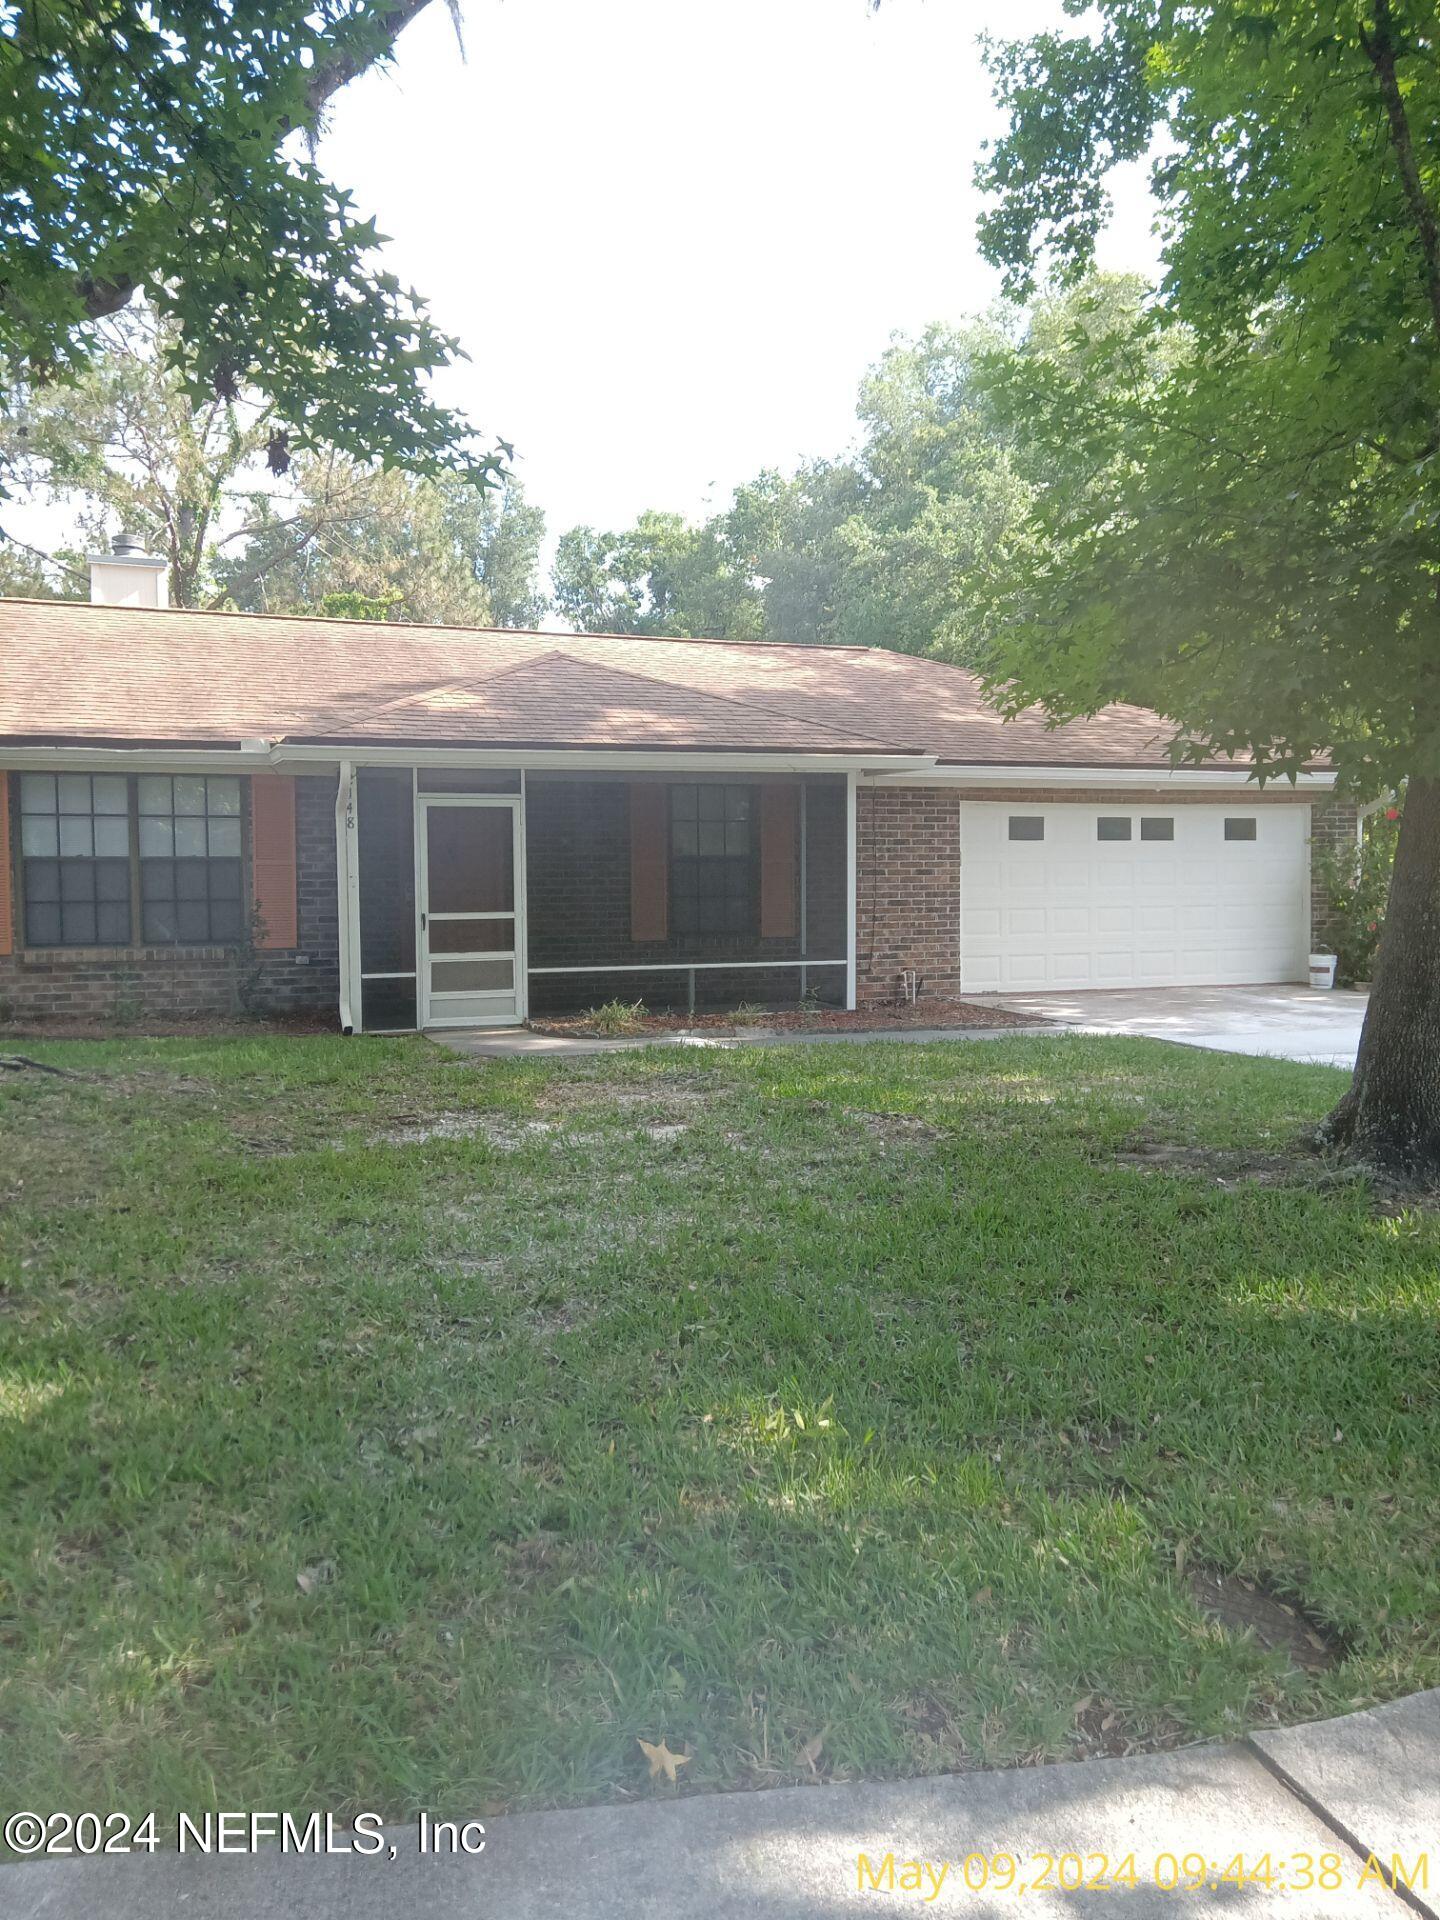 Middleburg, FL home for sale located at 2148 Center Way, Middleburg, FL 32068